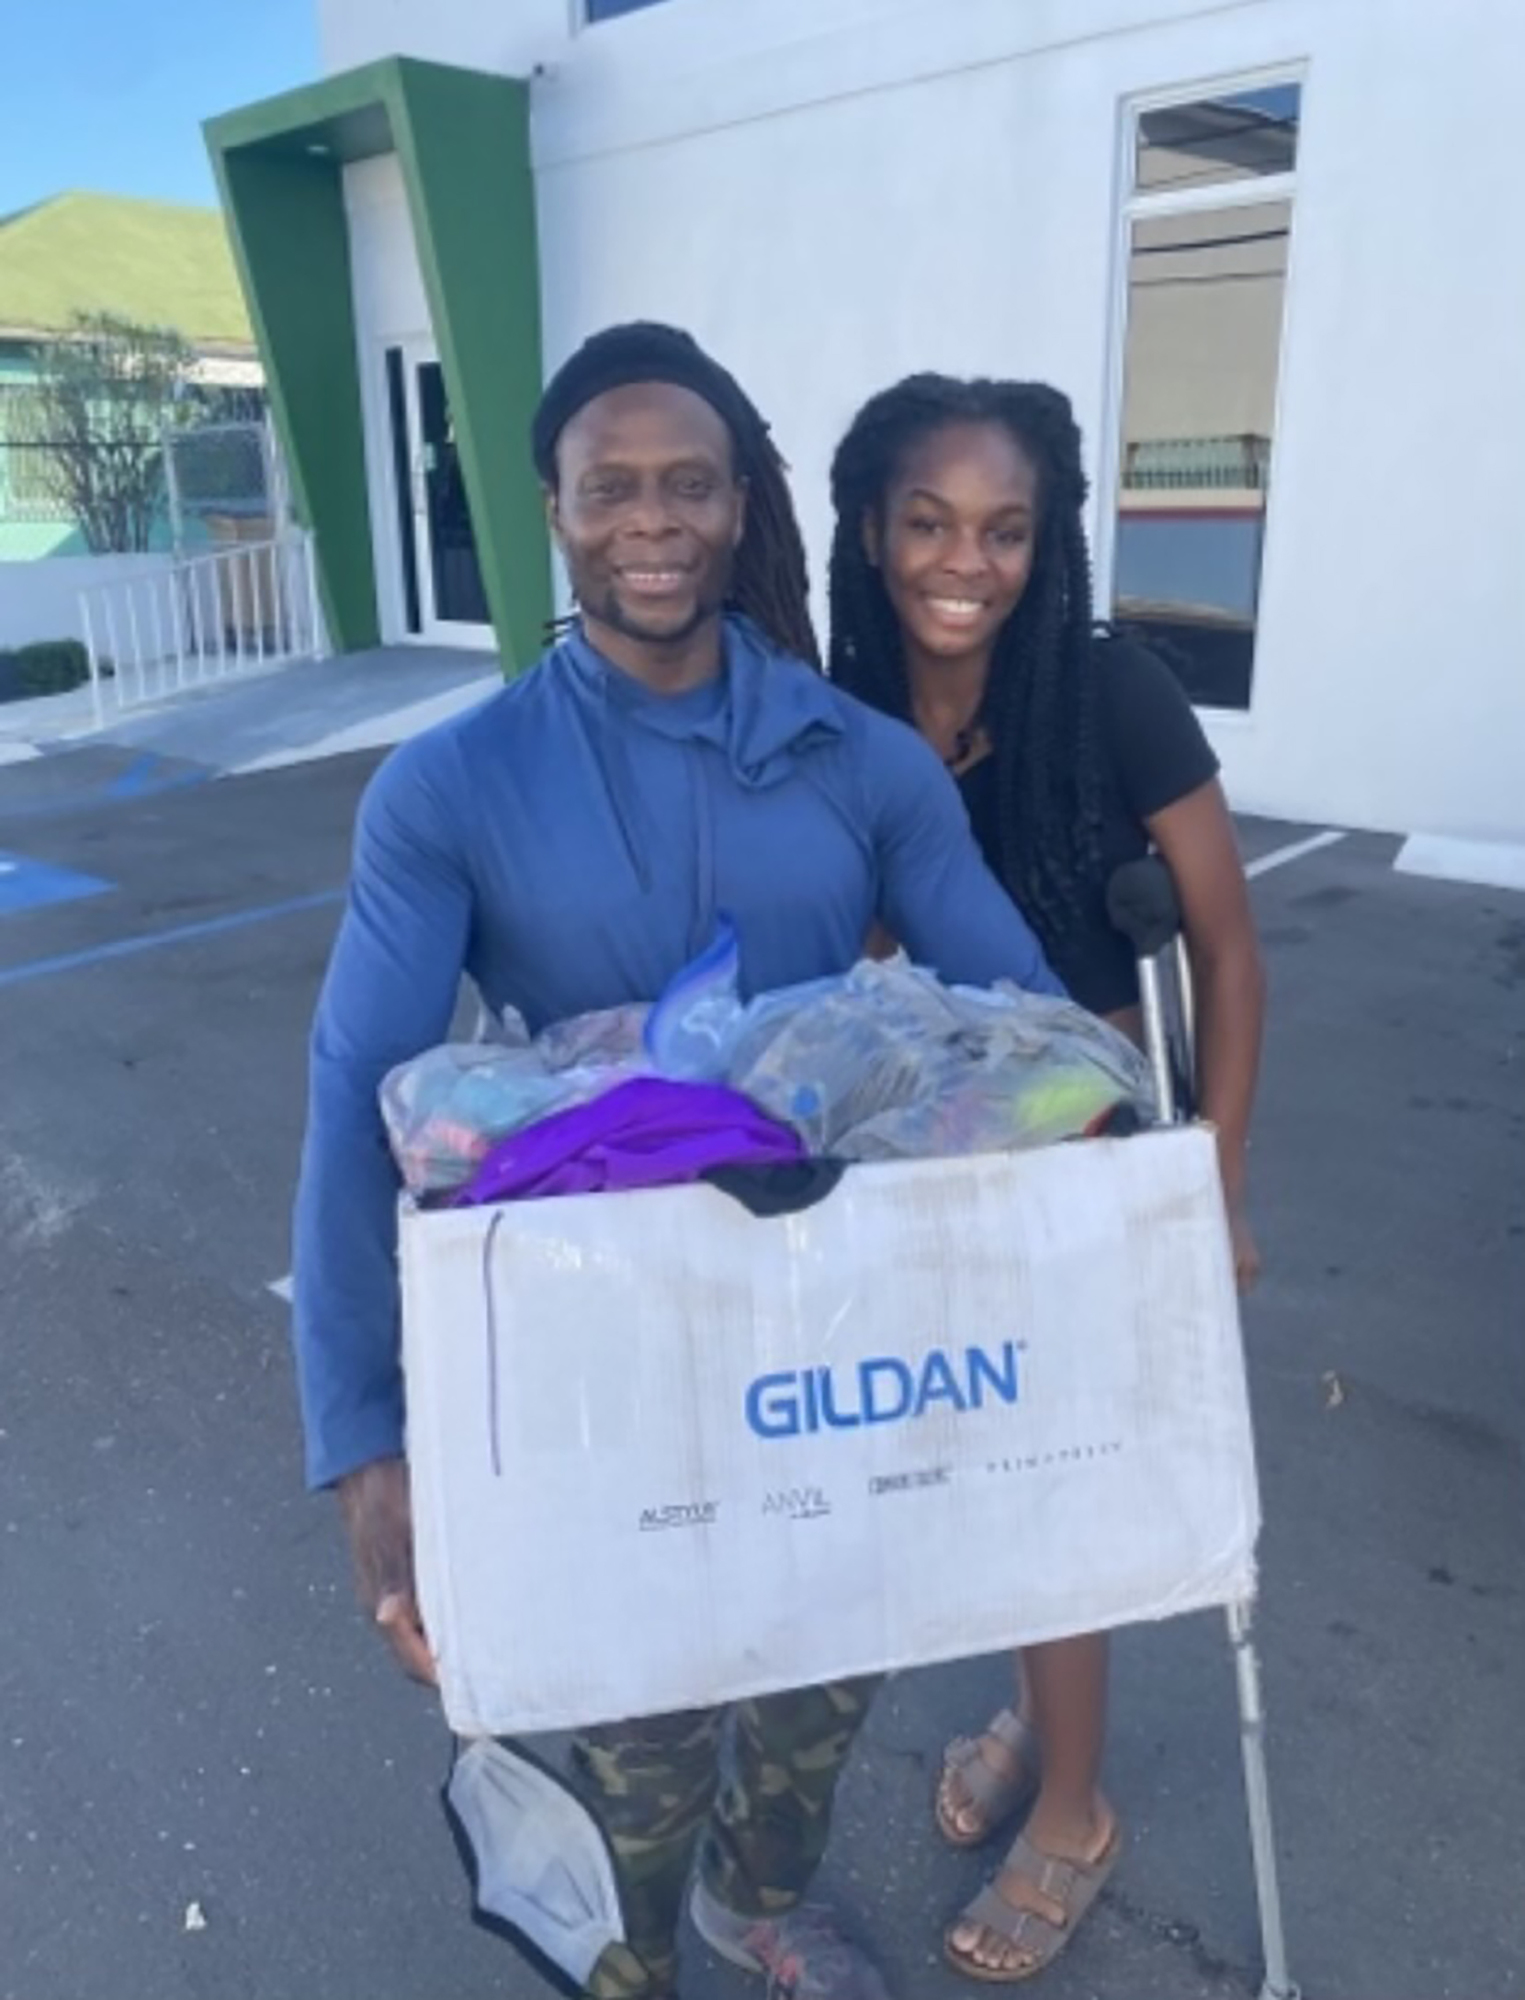 Trevor Ramsey with the Bahamas Gymnastics Federation and owner of Nassau Nastics thanks Rhegan Duncombe, founder of Gymnast to Gymnast, for her donations. Courtesy photo.